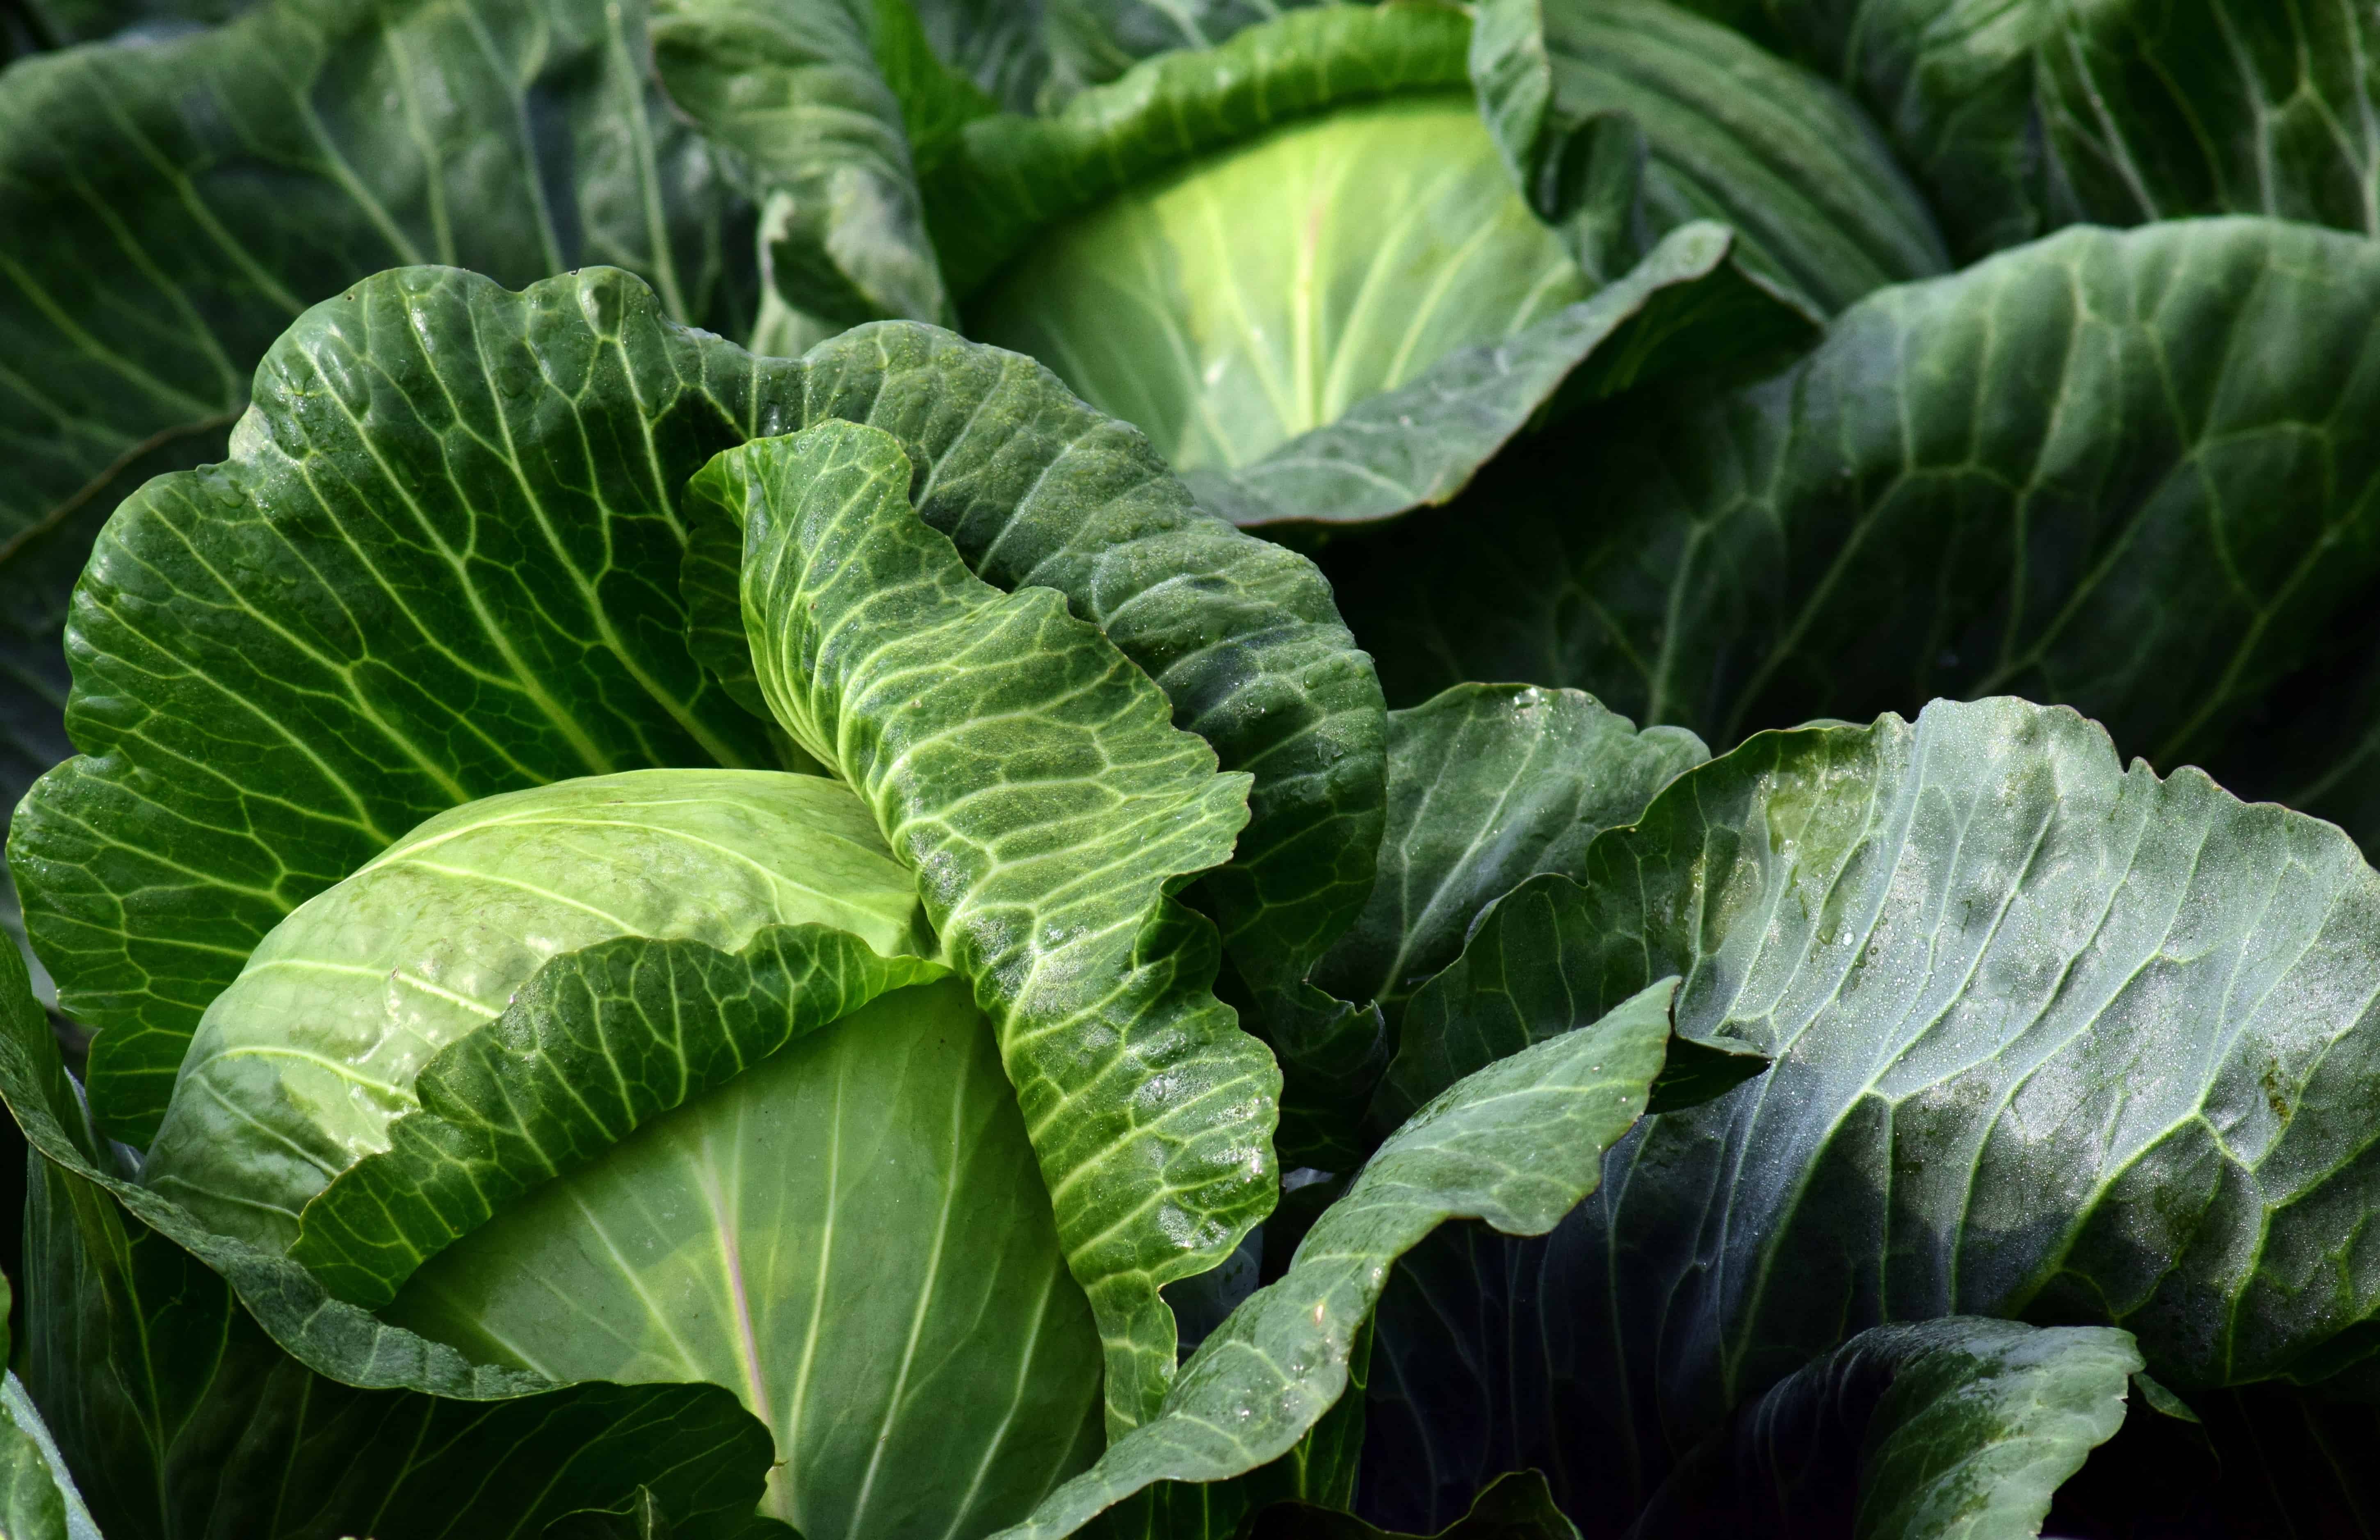 Free picture: green leaf, nature, vegetable, cabbage, flora, herb ...